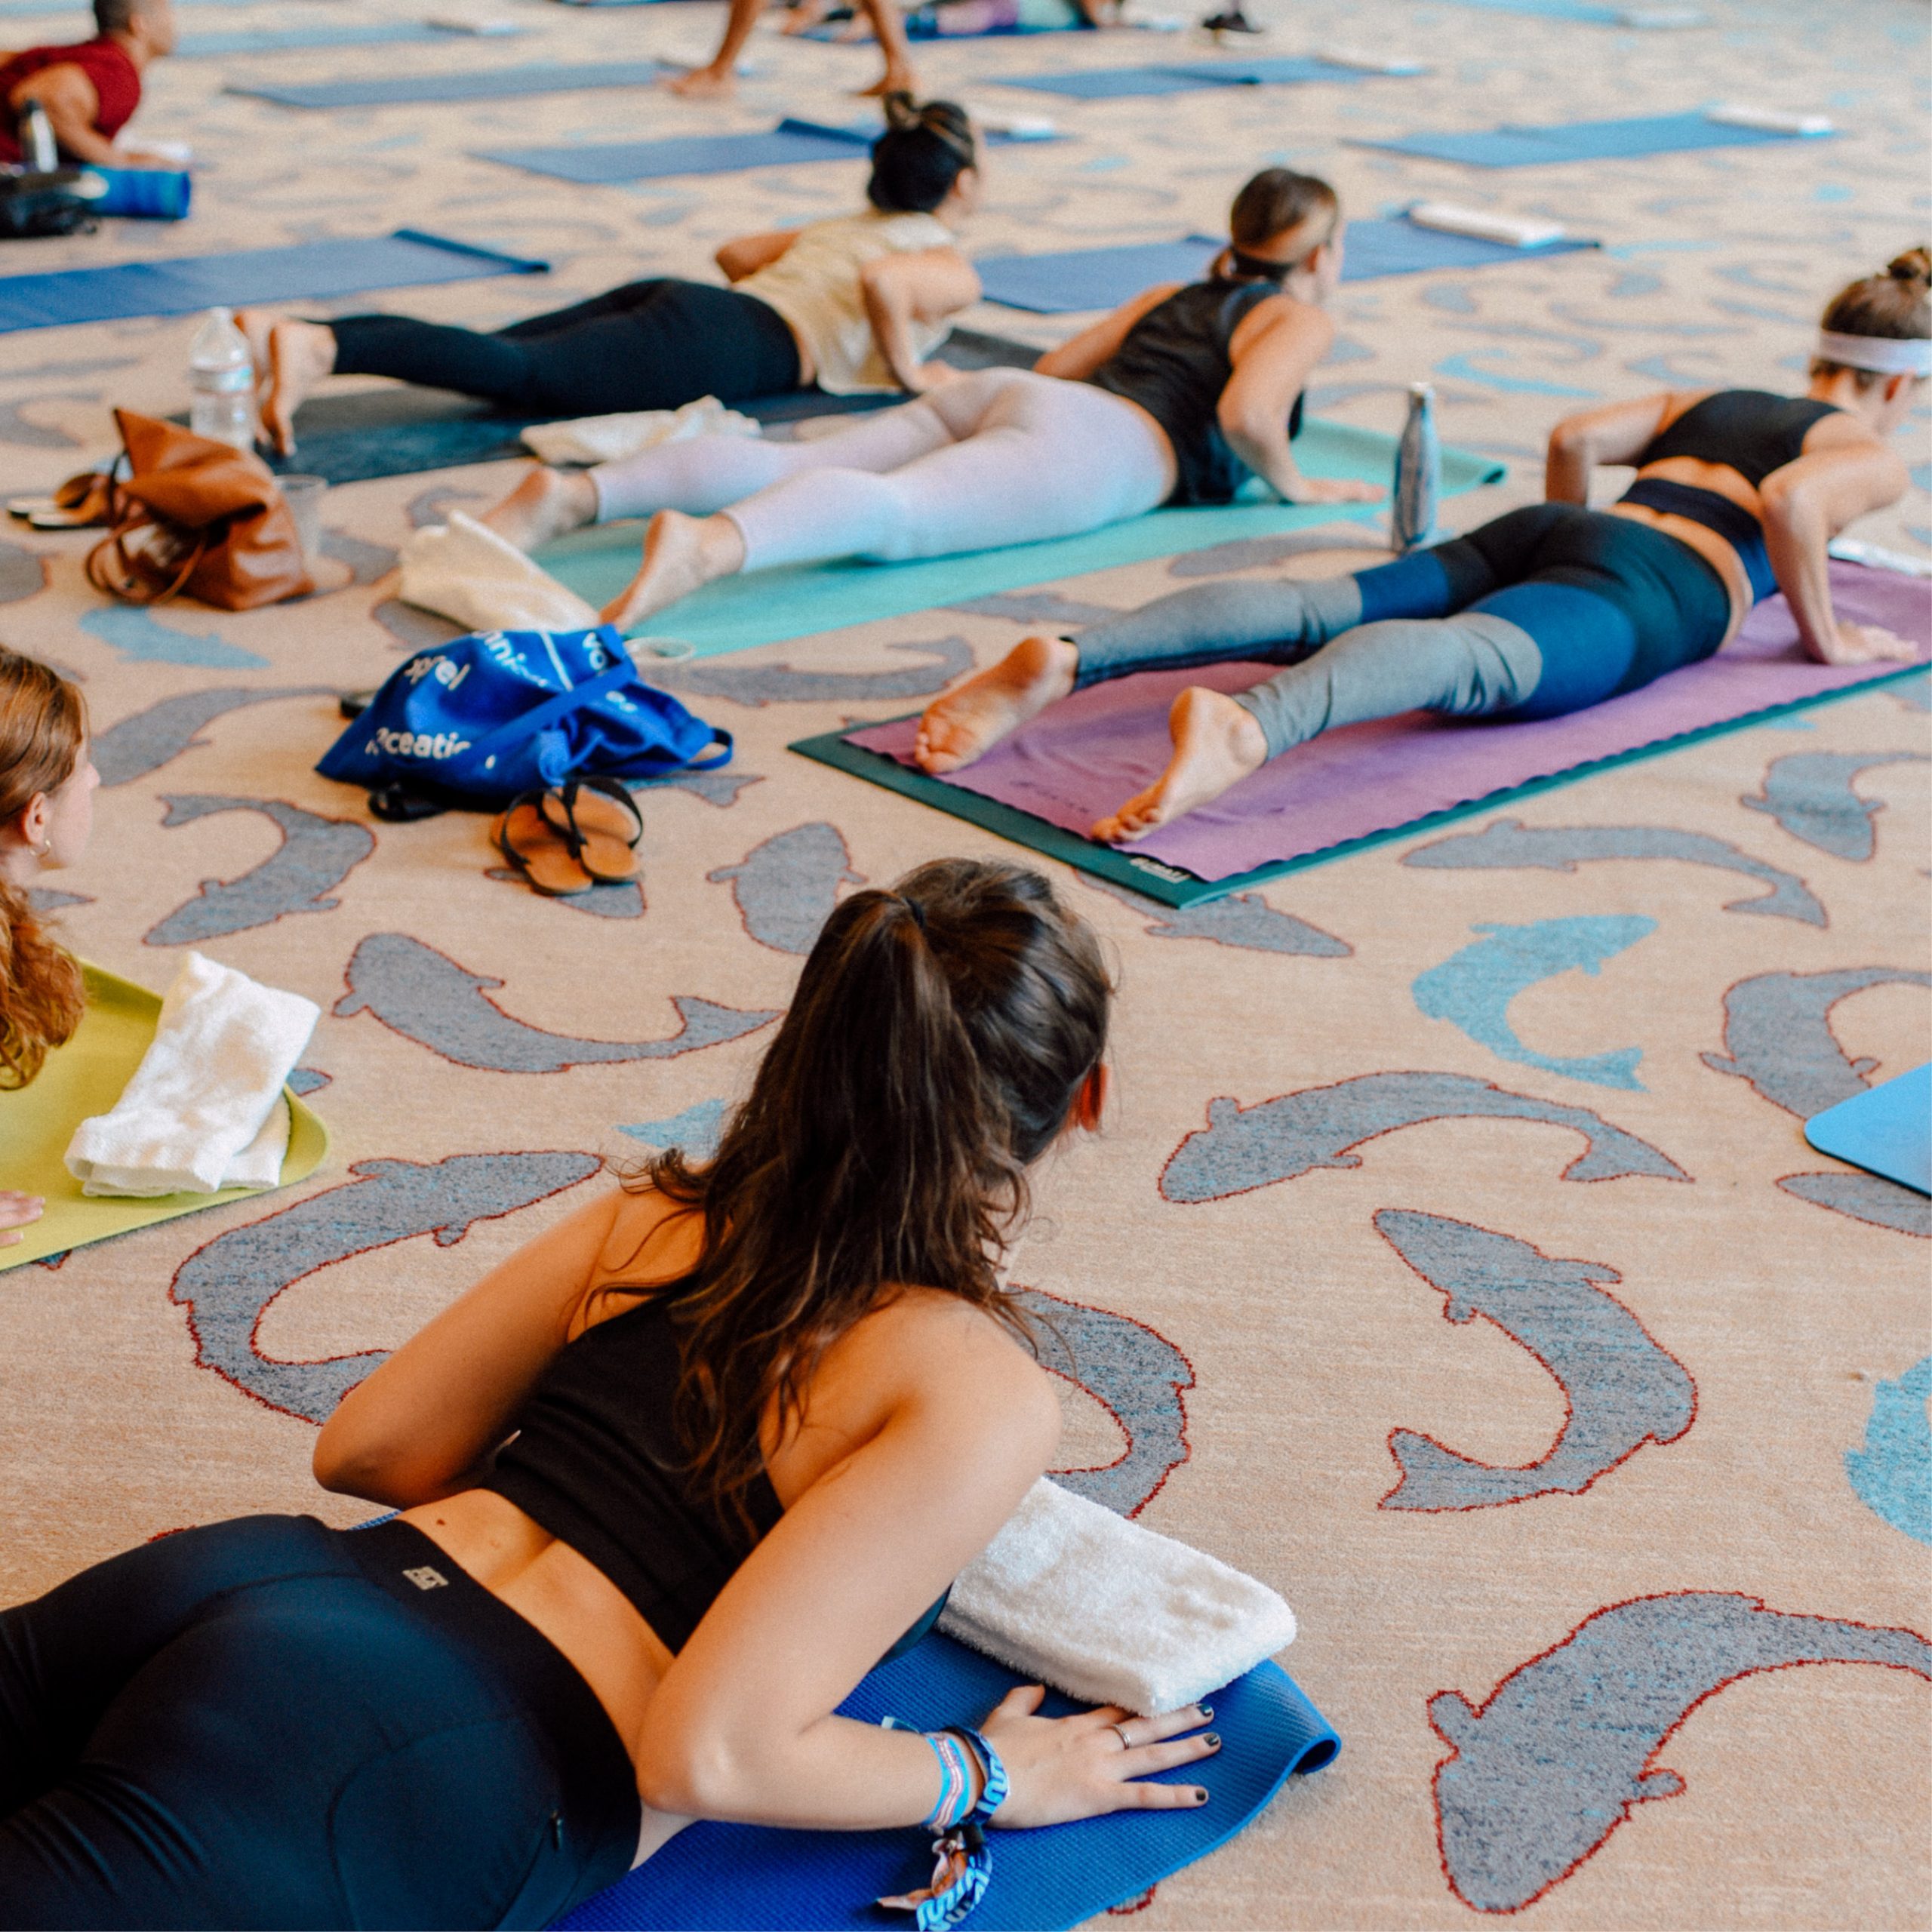 Women doing yoga in a room